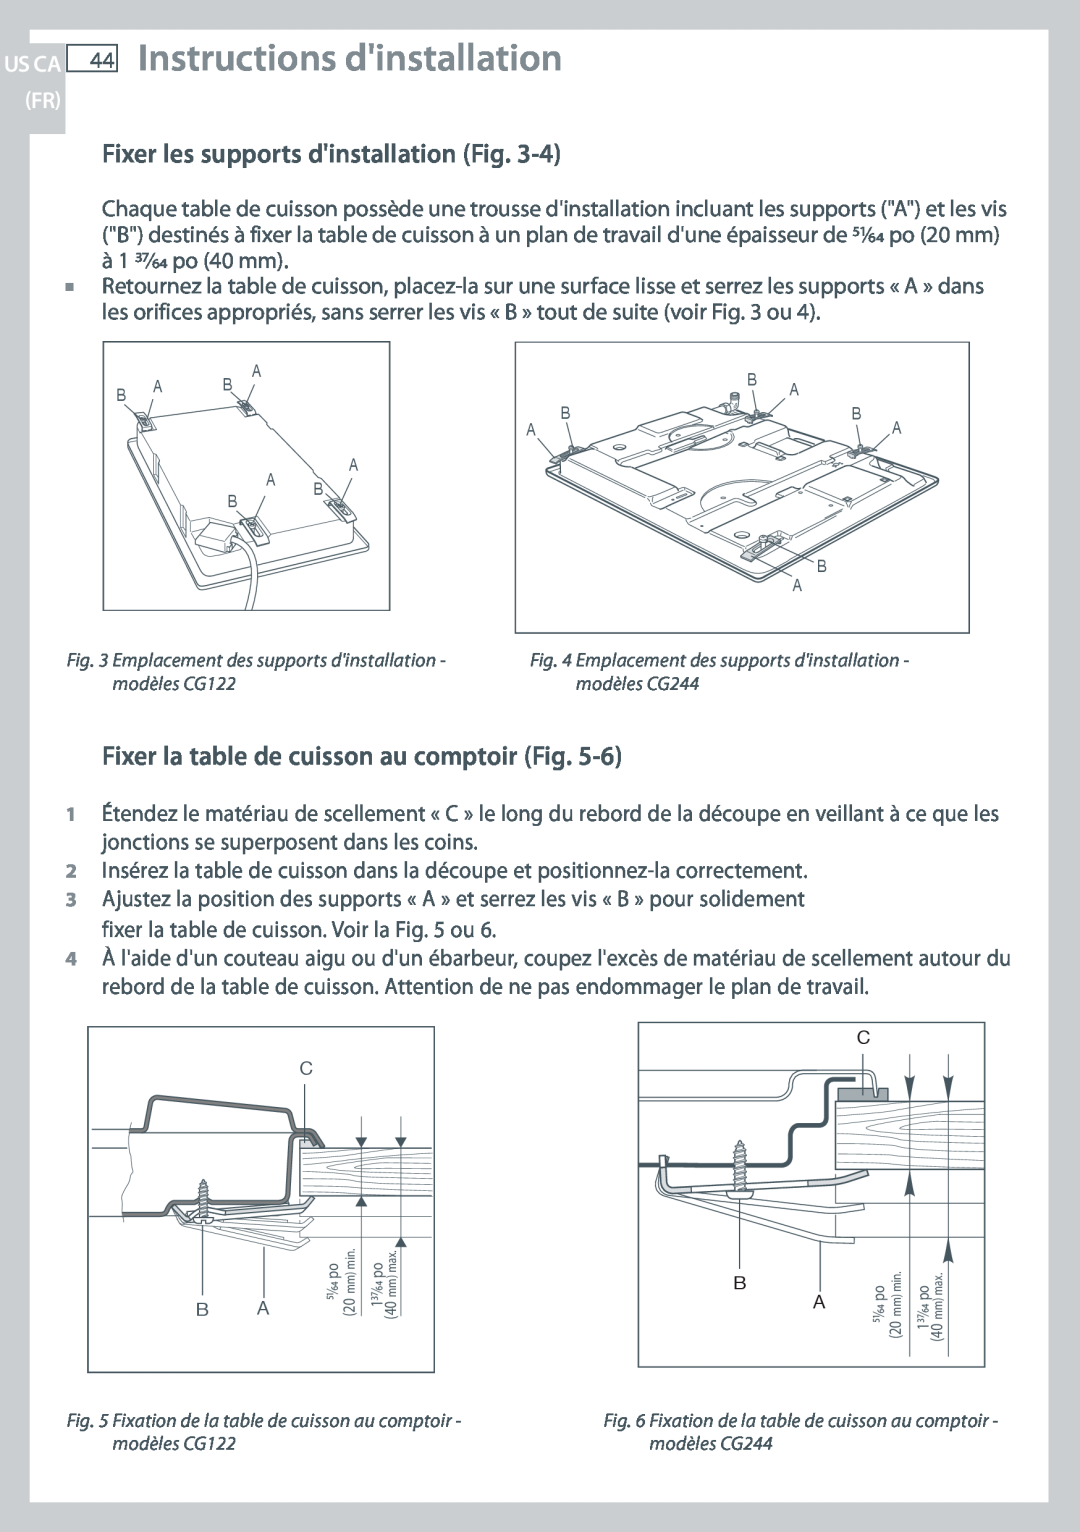 Fisher & Paykel CG244, CG122 installation instructions 44Instructions dinstallation, Fixer les supports dinstallation Fig 